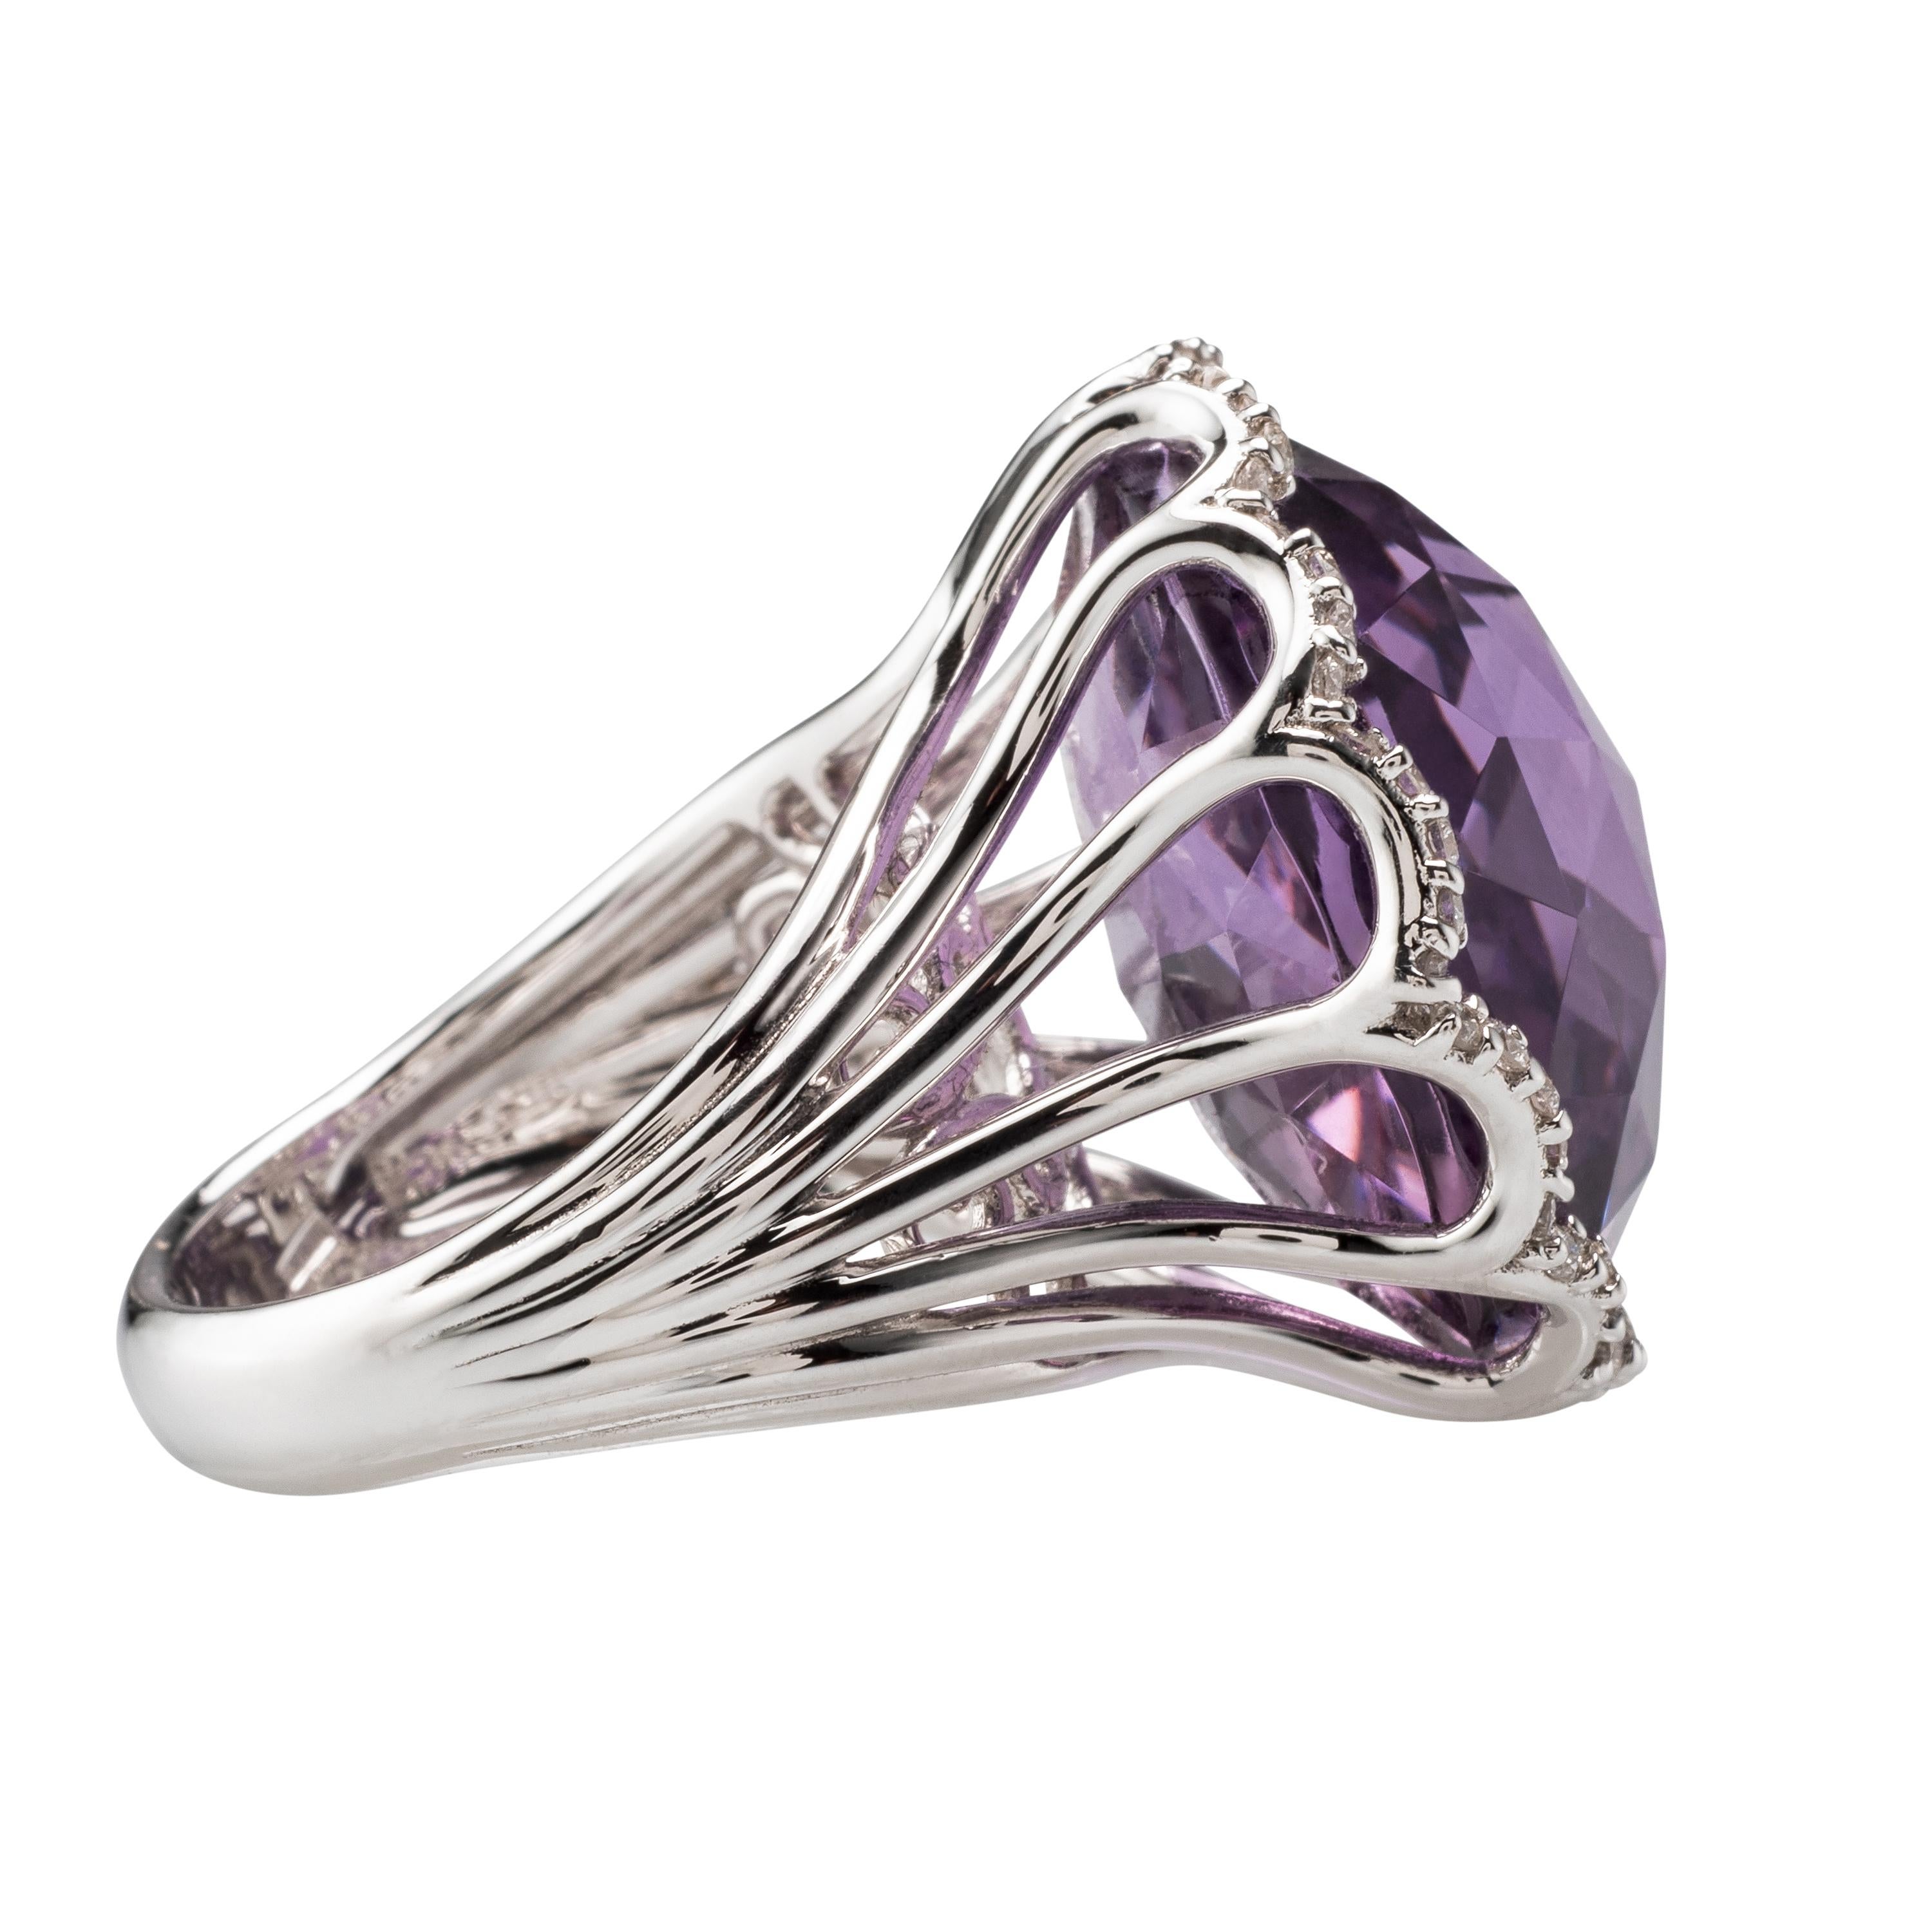 Modern Cut Amethyst and Diamond Cocktail Ring. This Cocktail Ring is truly an impressive piece of jewellery. Produced in Italy, with attention to a very small detail.
30 Carat Amethyst and 0.51 Carat Diamonds set in 18 Karat White